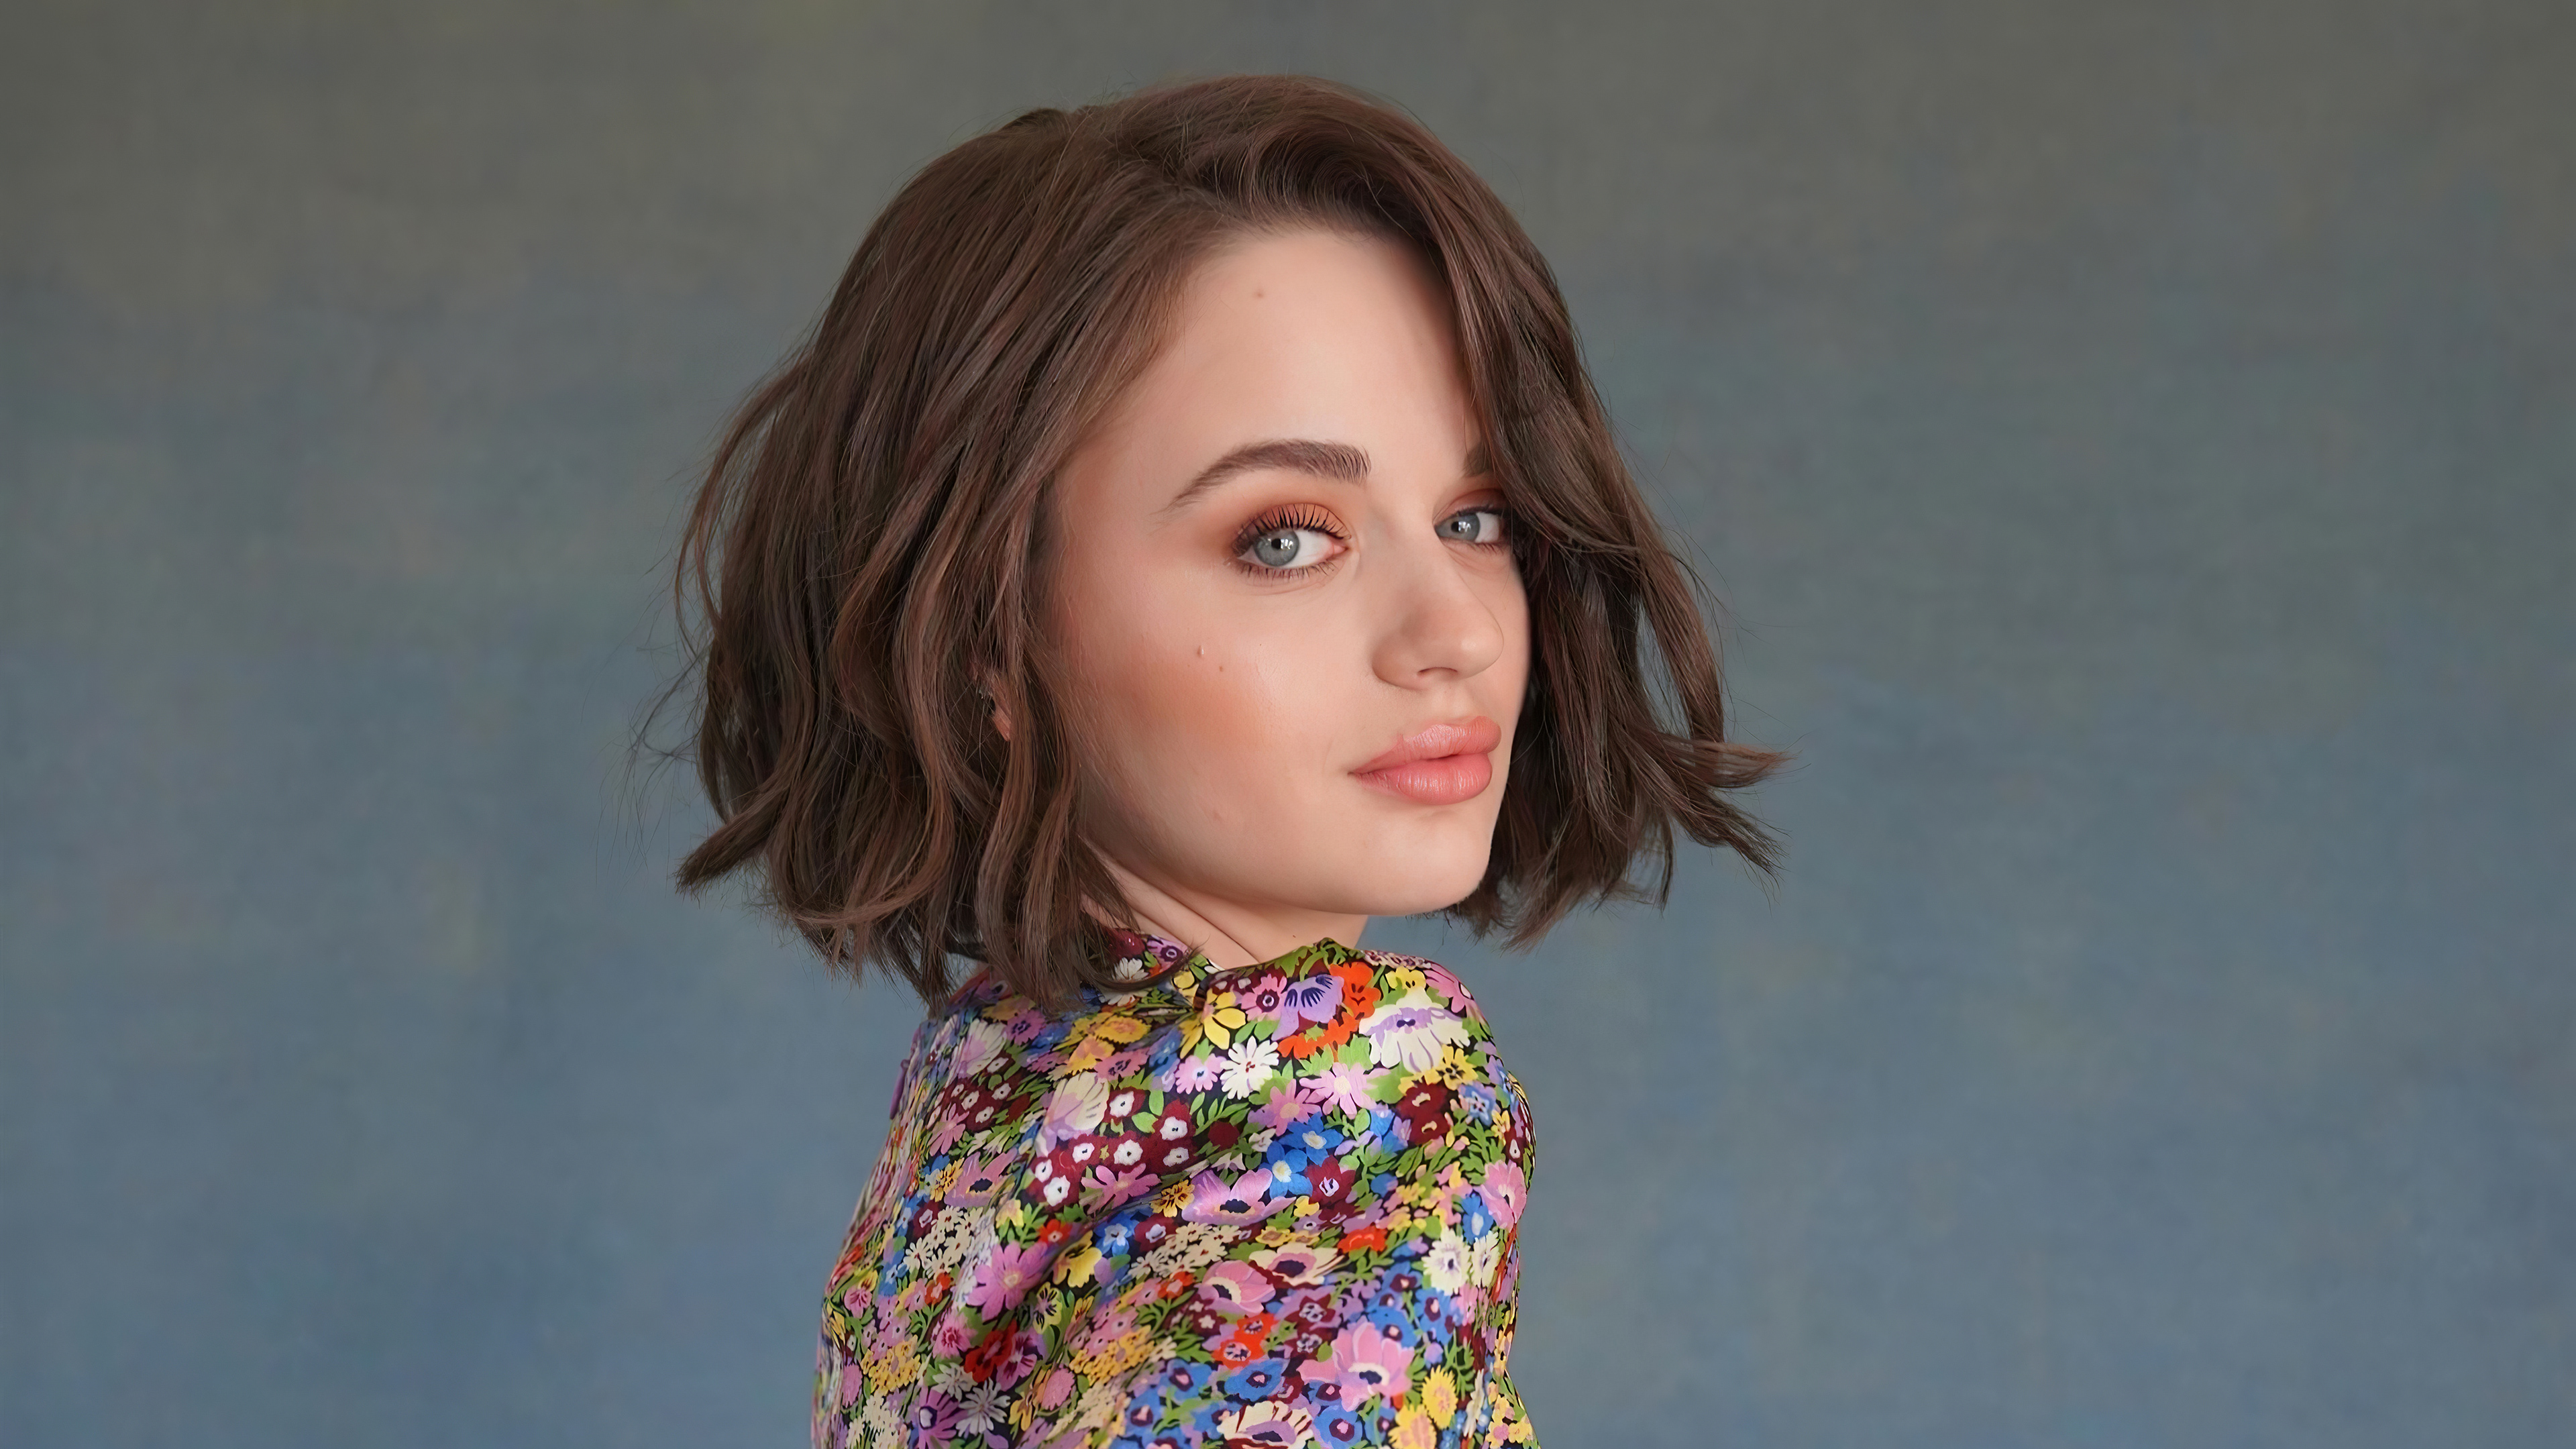 New Joey King Wallpapers